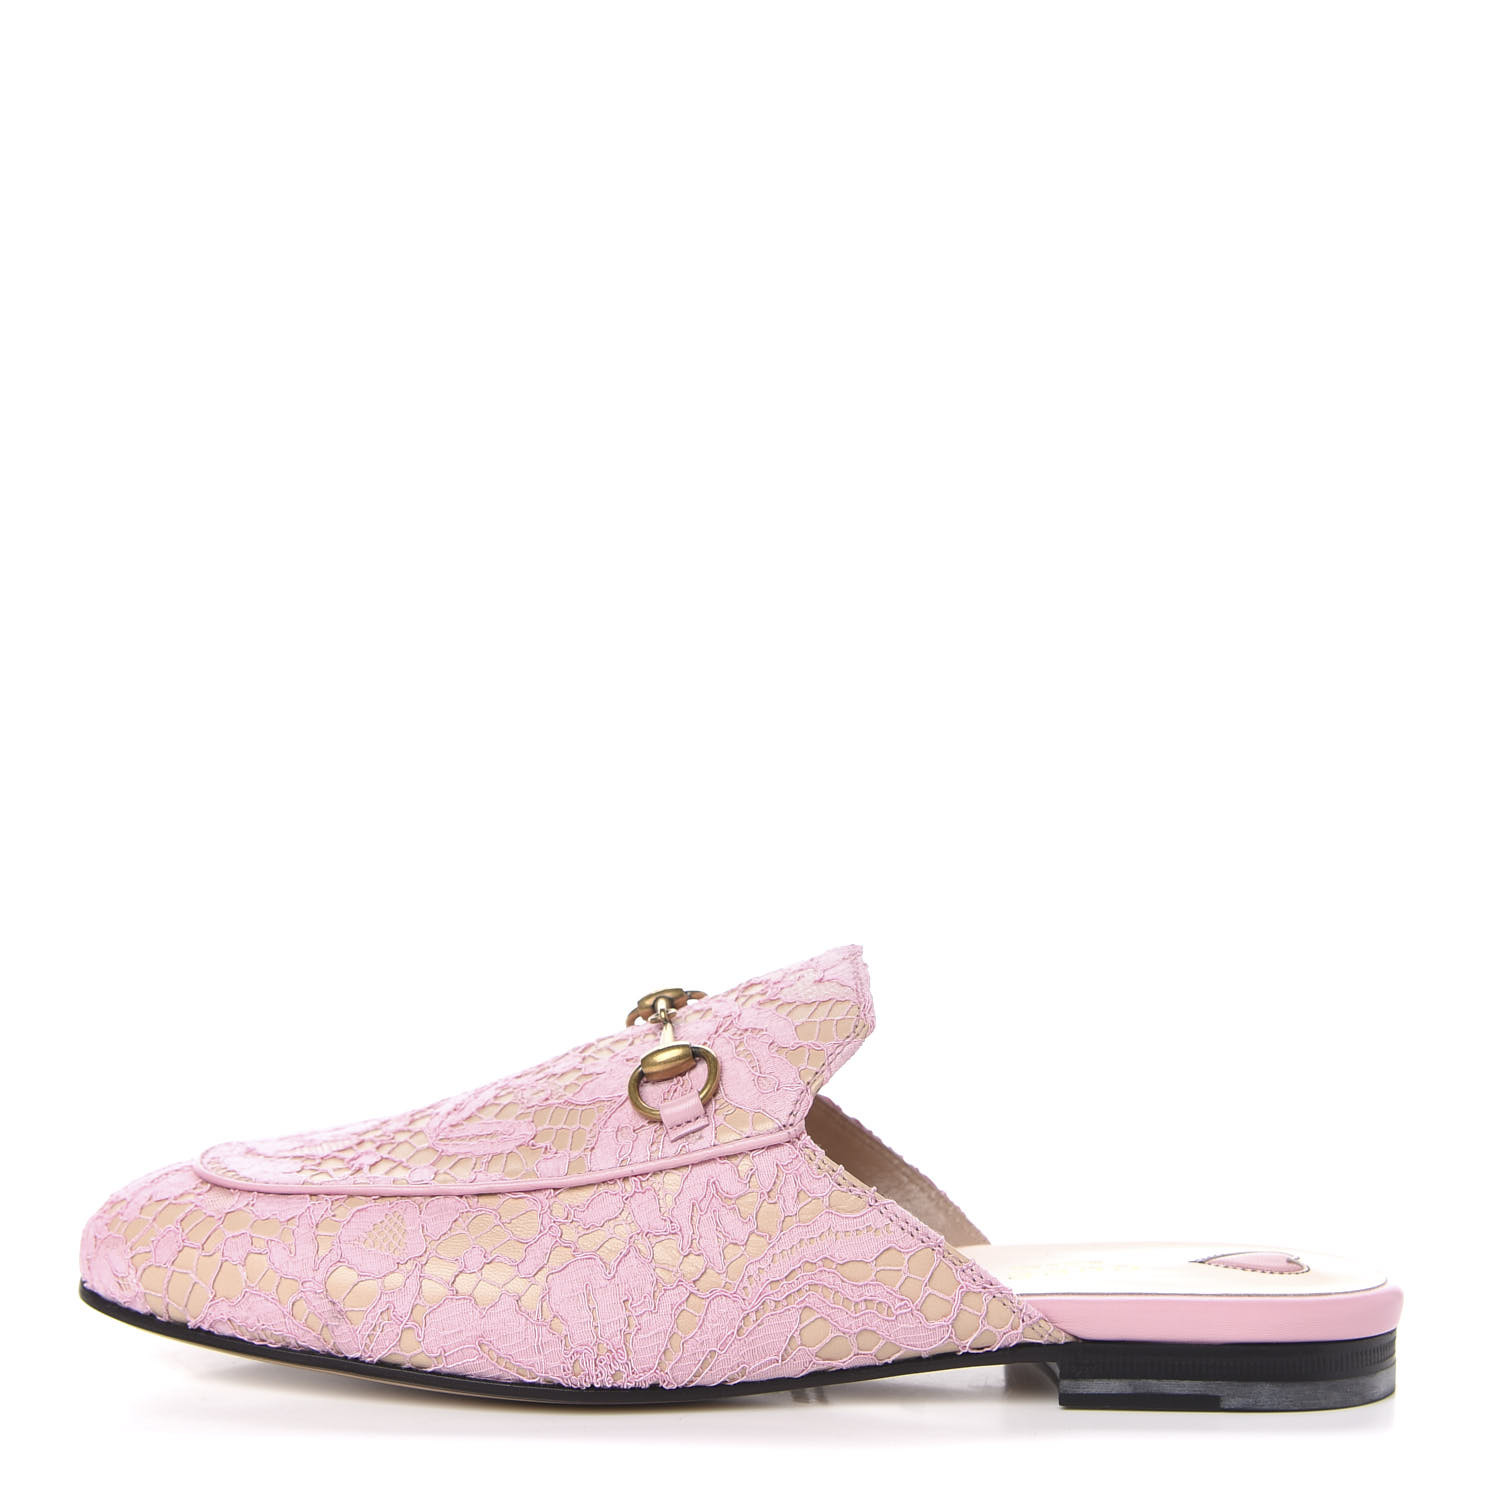 GUCCI Womens Lace Princetown Mules 39 Pink 637784